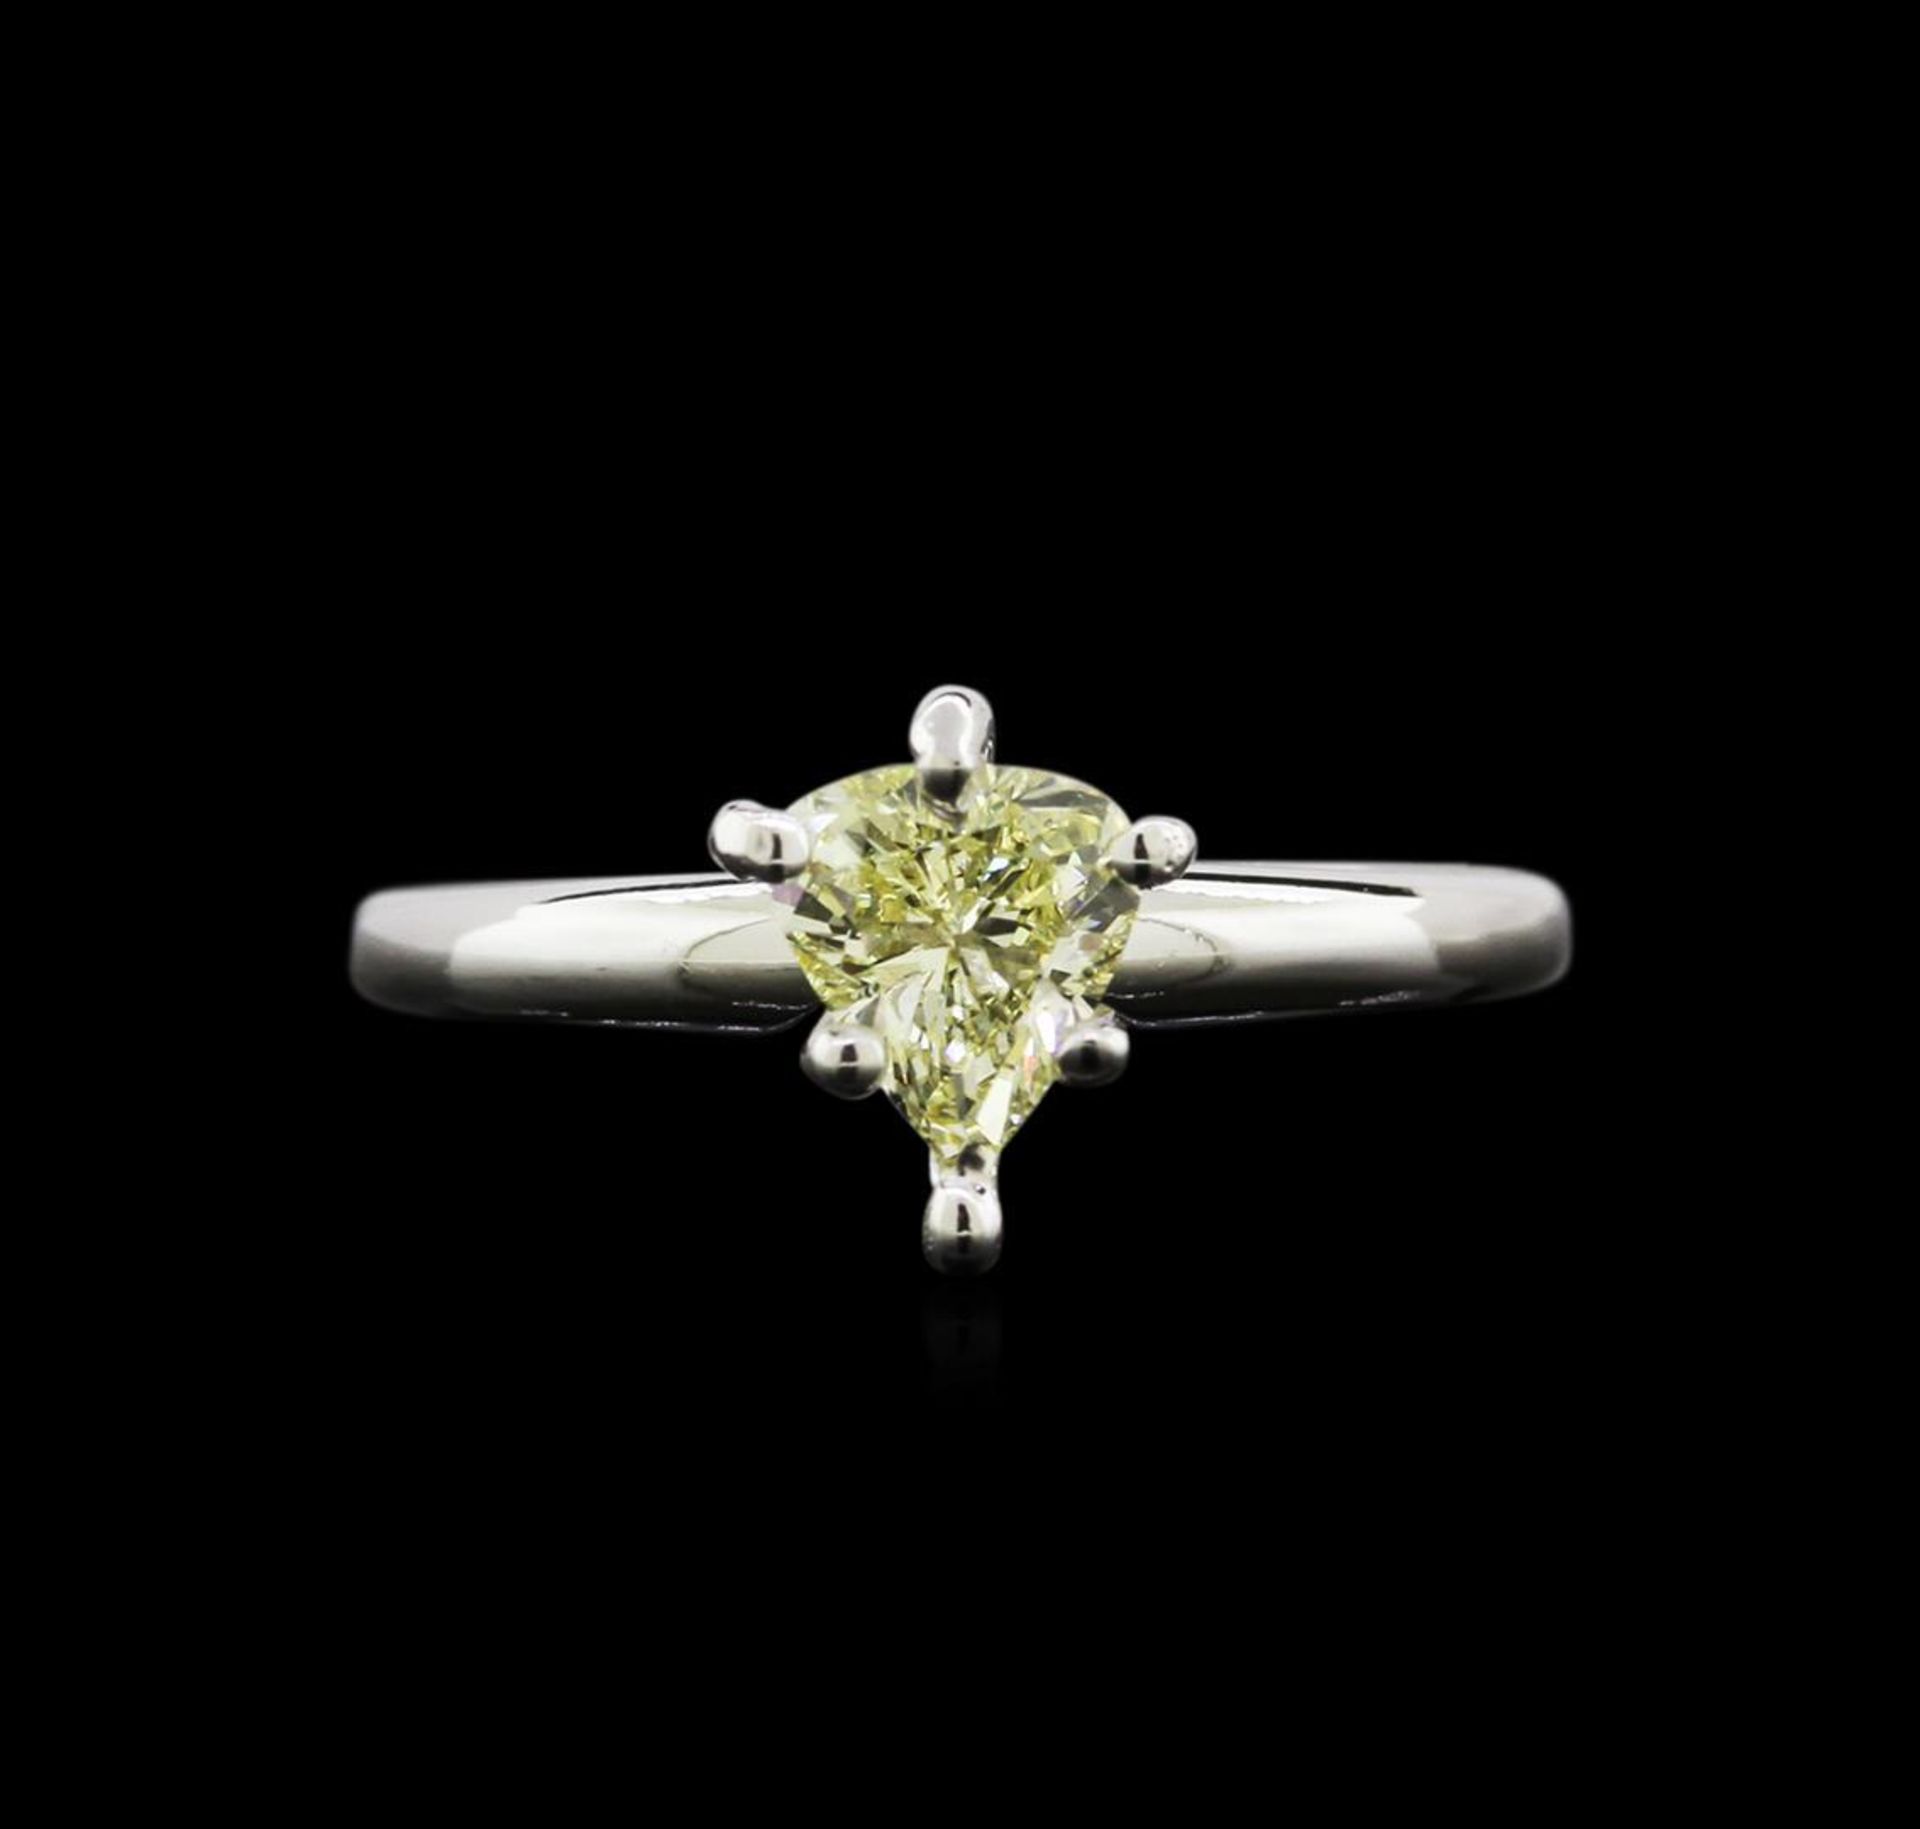 GIA Cert 0.74ctw Diamond Solitaire Ring - 14KT White Gold - Image 2 of 5